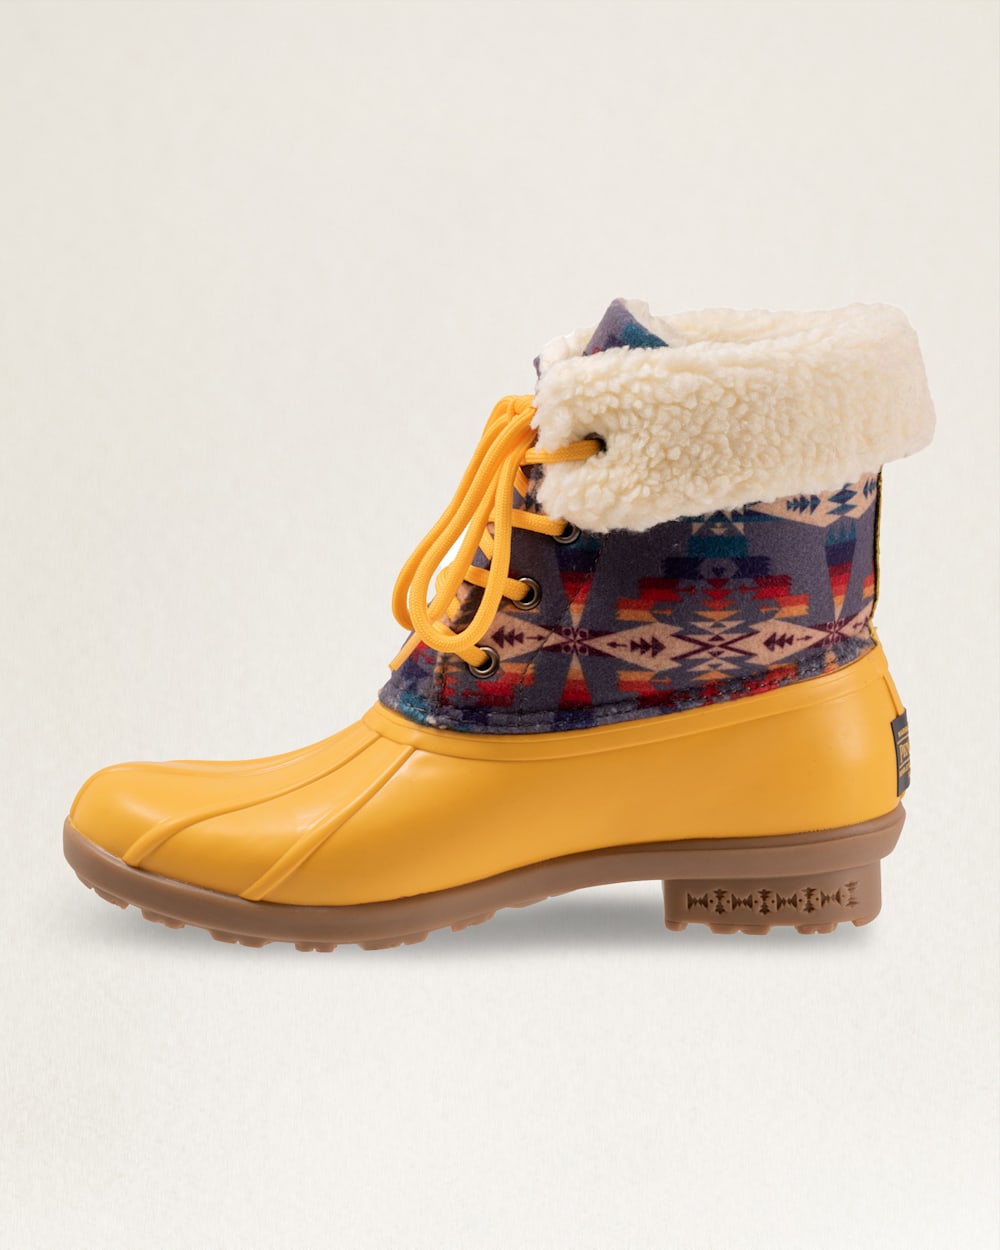 ALTERNATE VIEW OF WOMENS TUCSON DUCK MID BOOT IN YELLOW image number 5